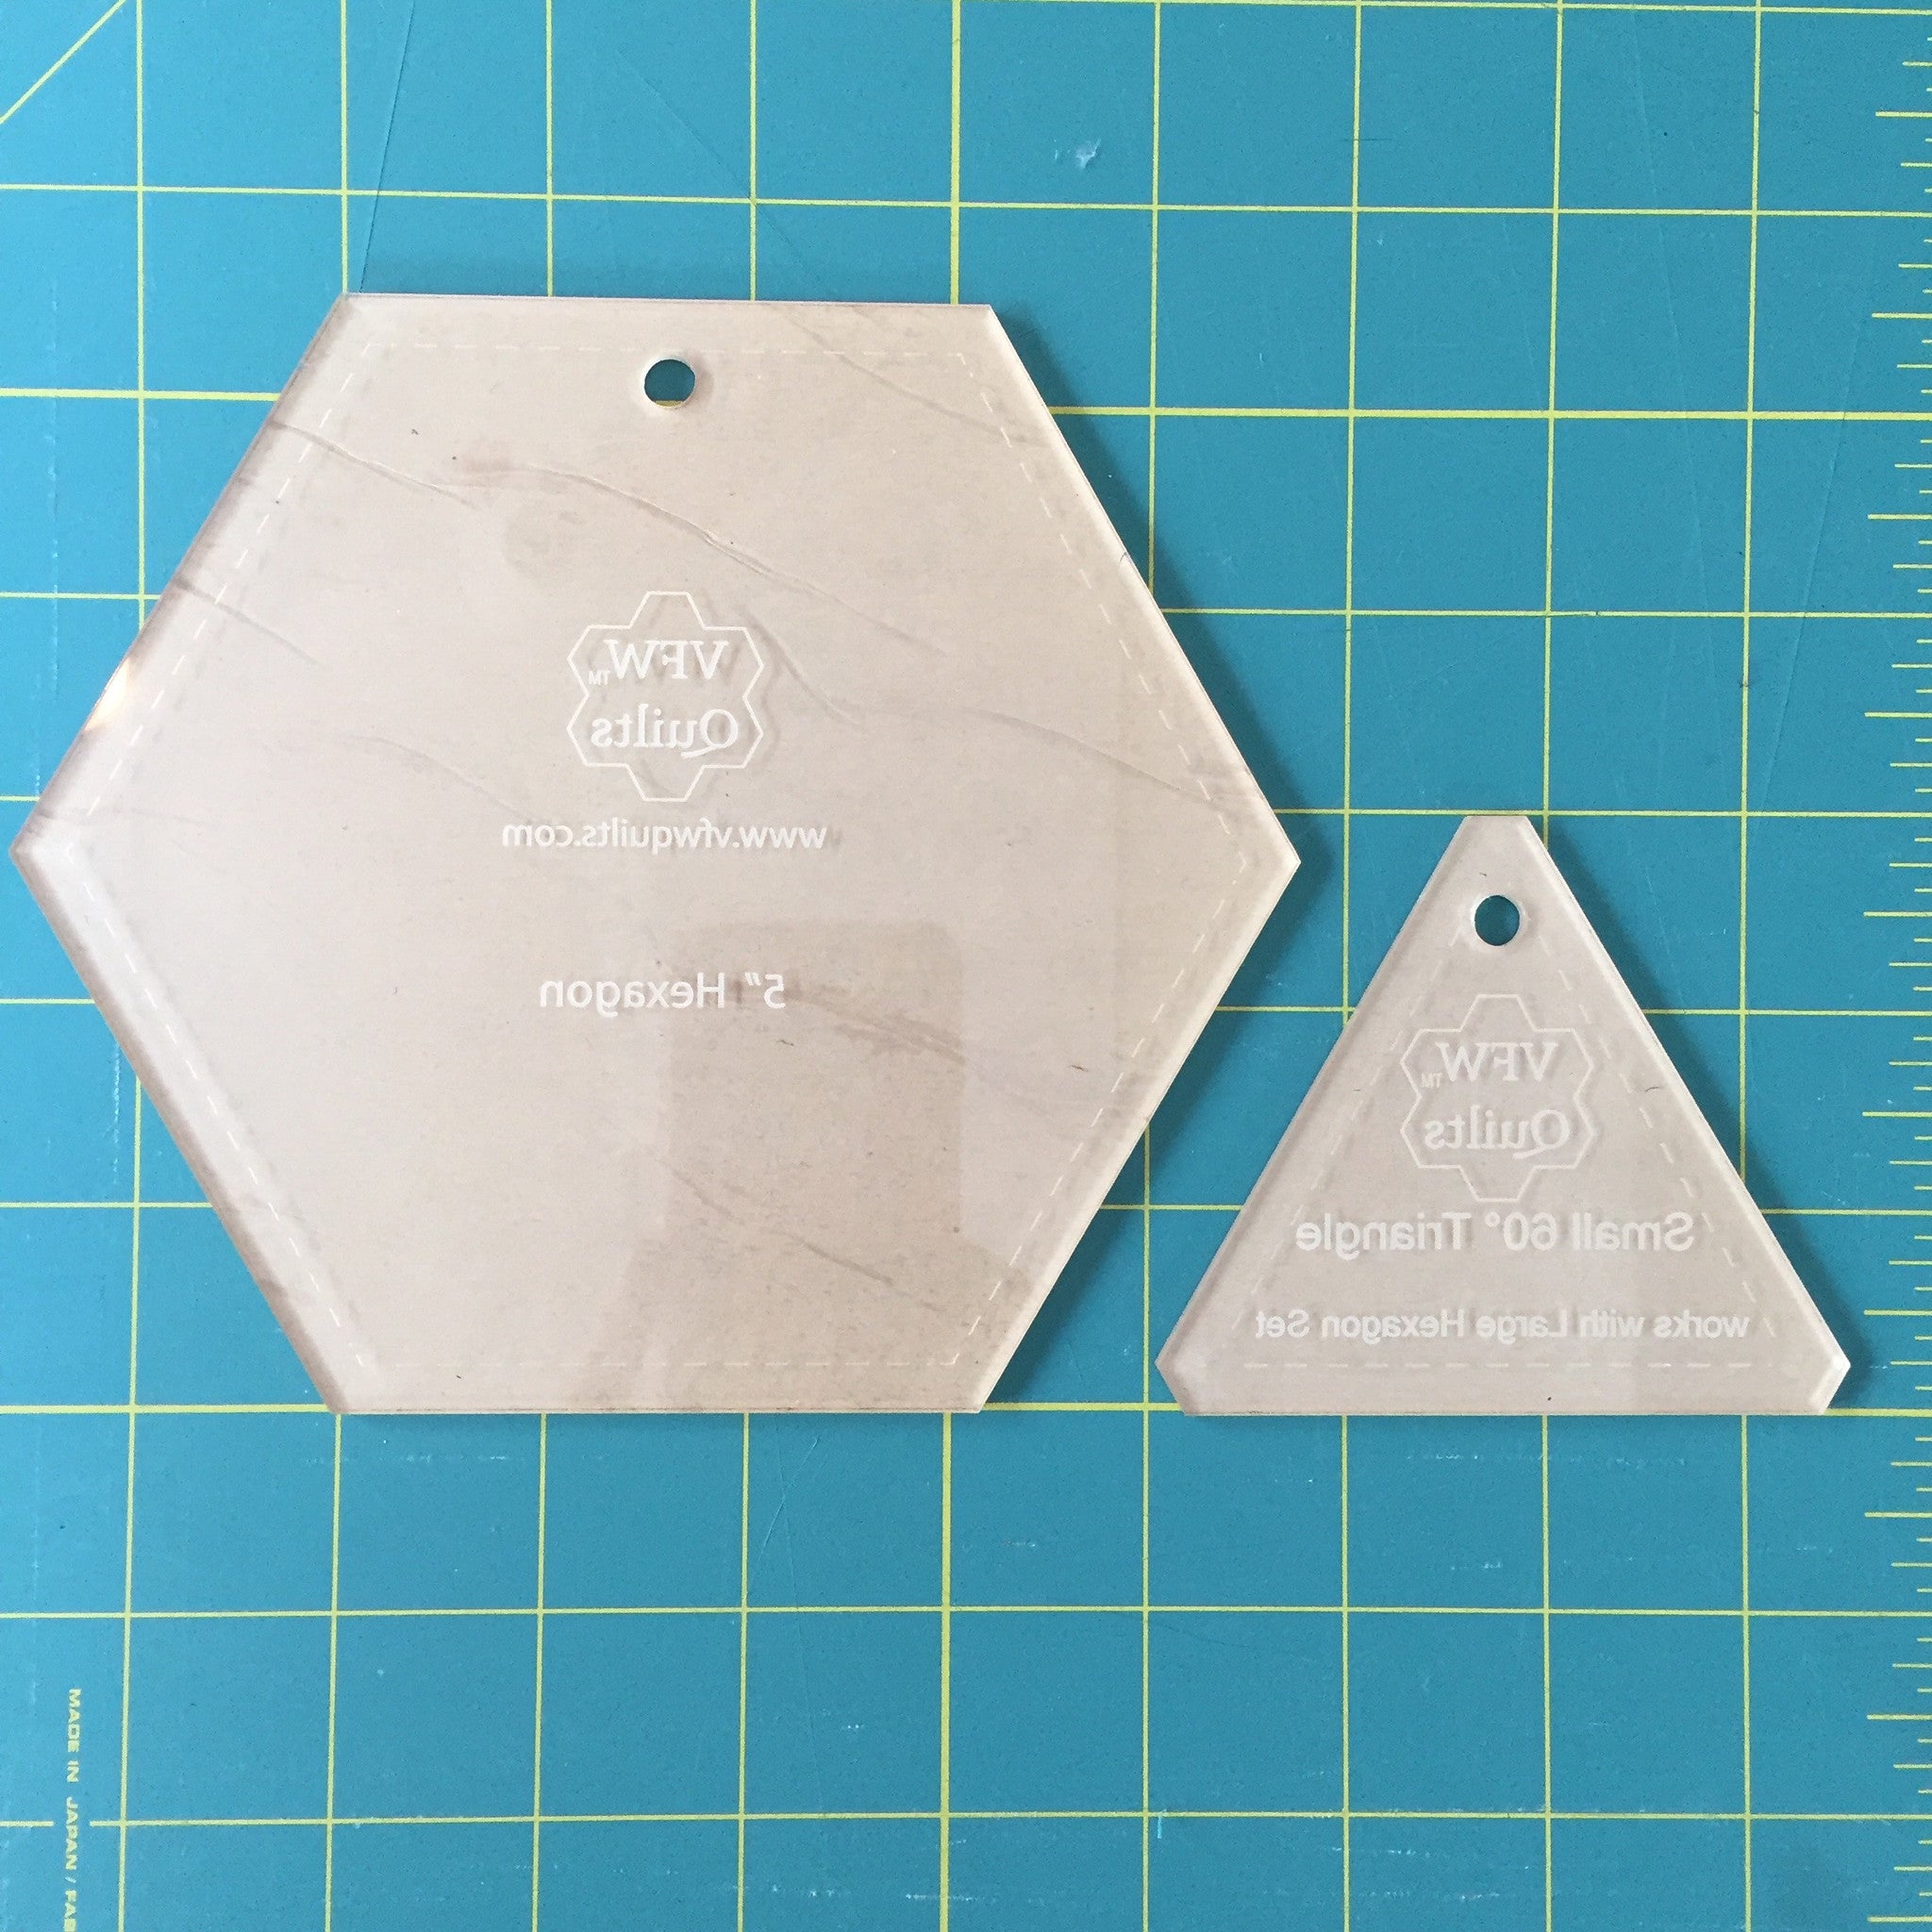 DOUBLE WEDDING RING Template Diagrams - McCalls Quilting